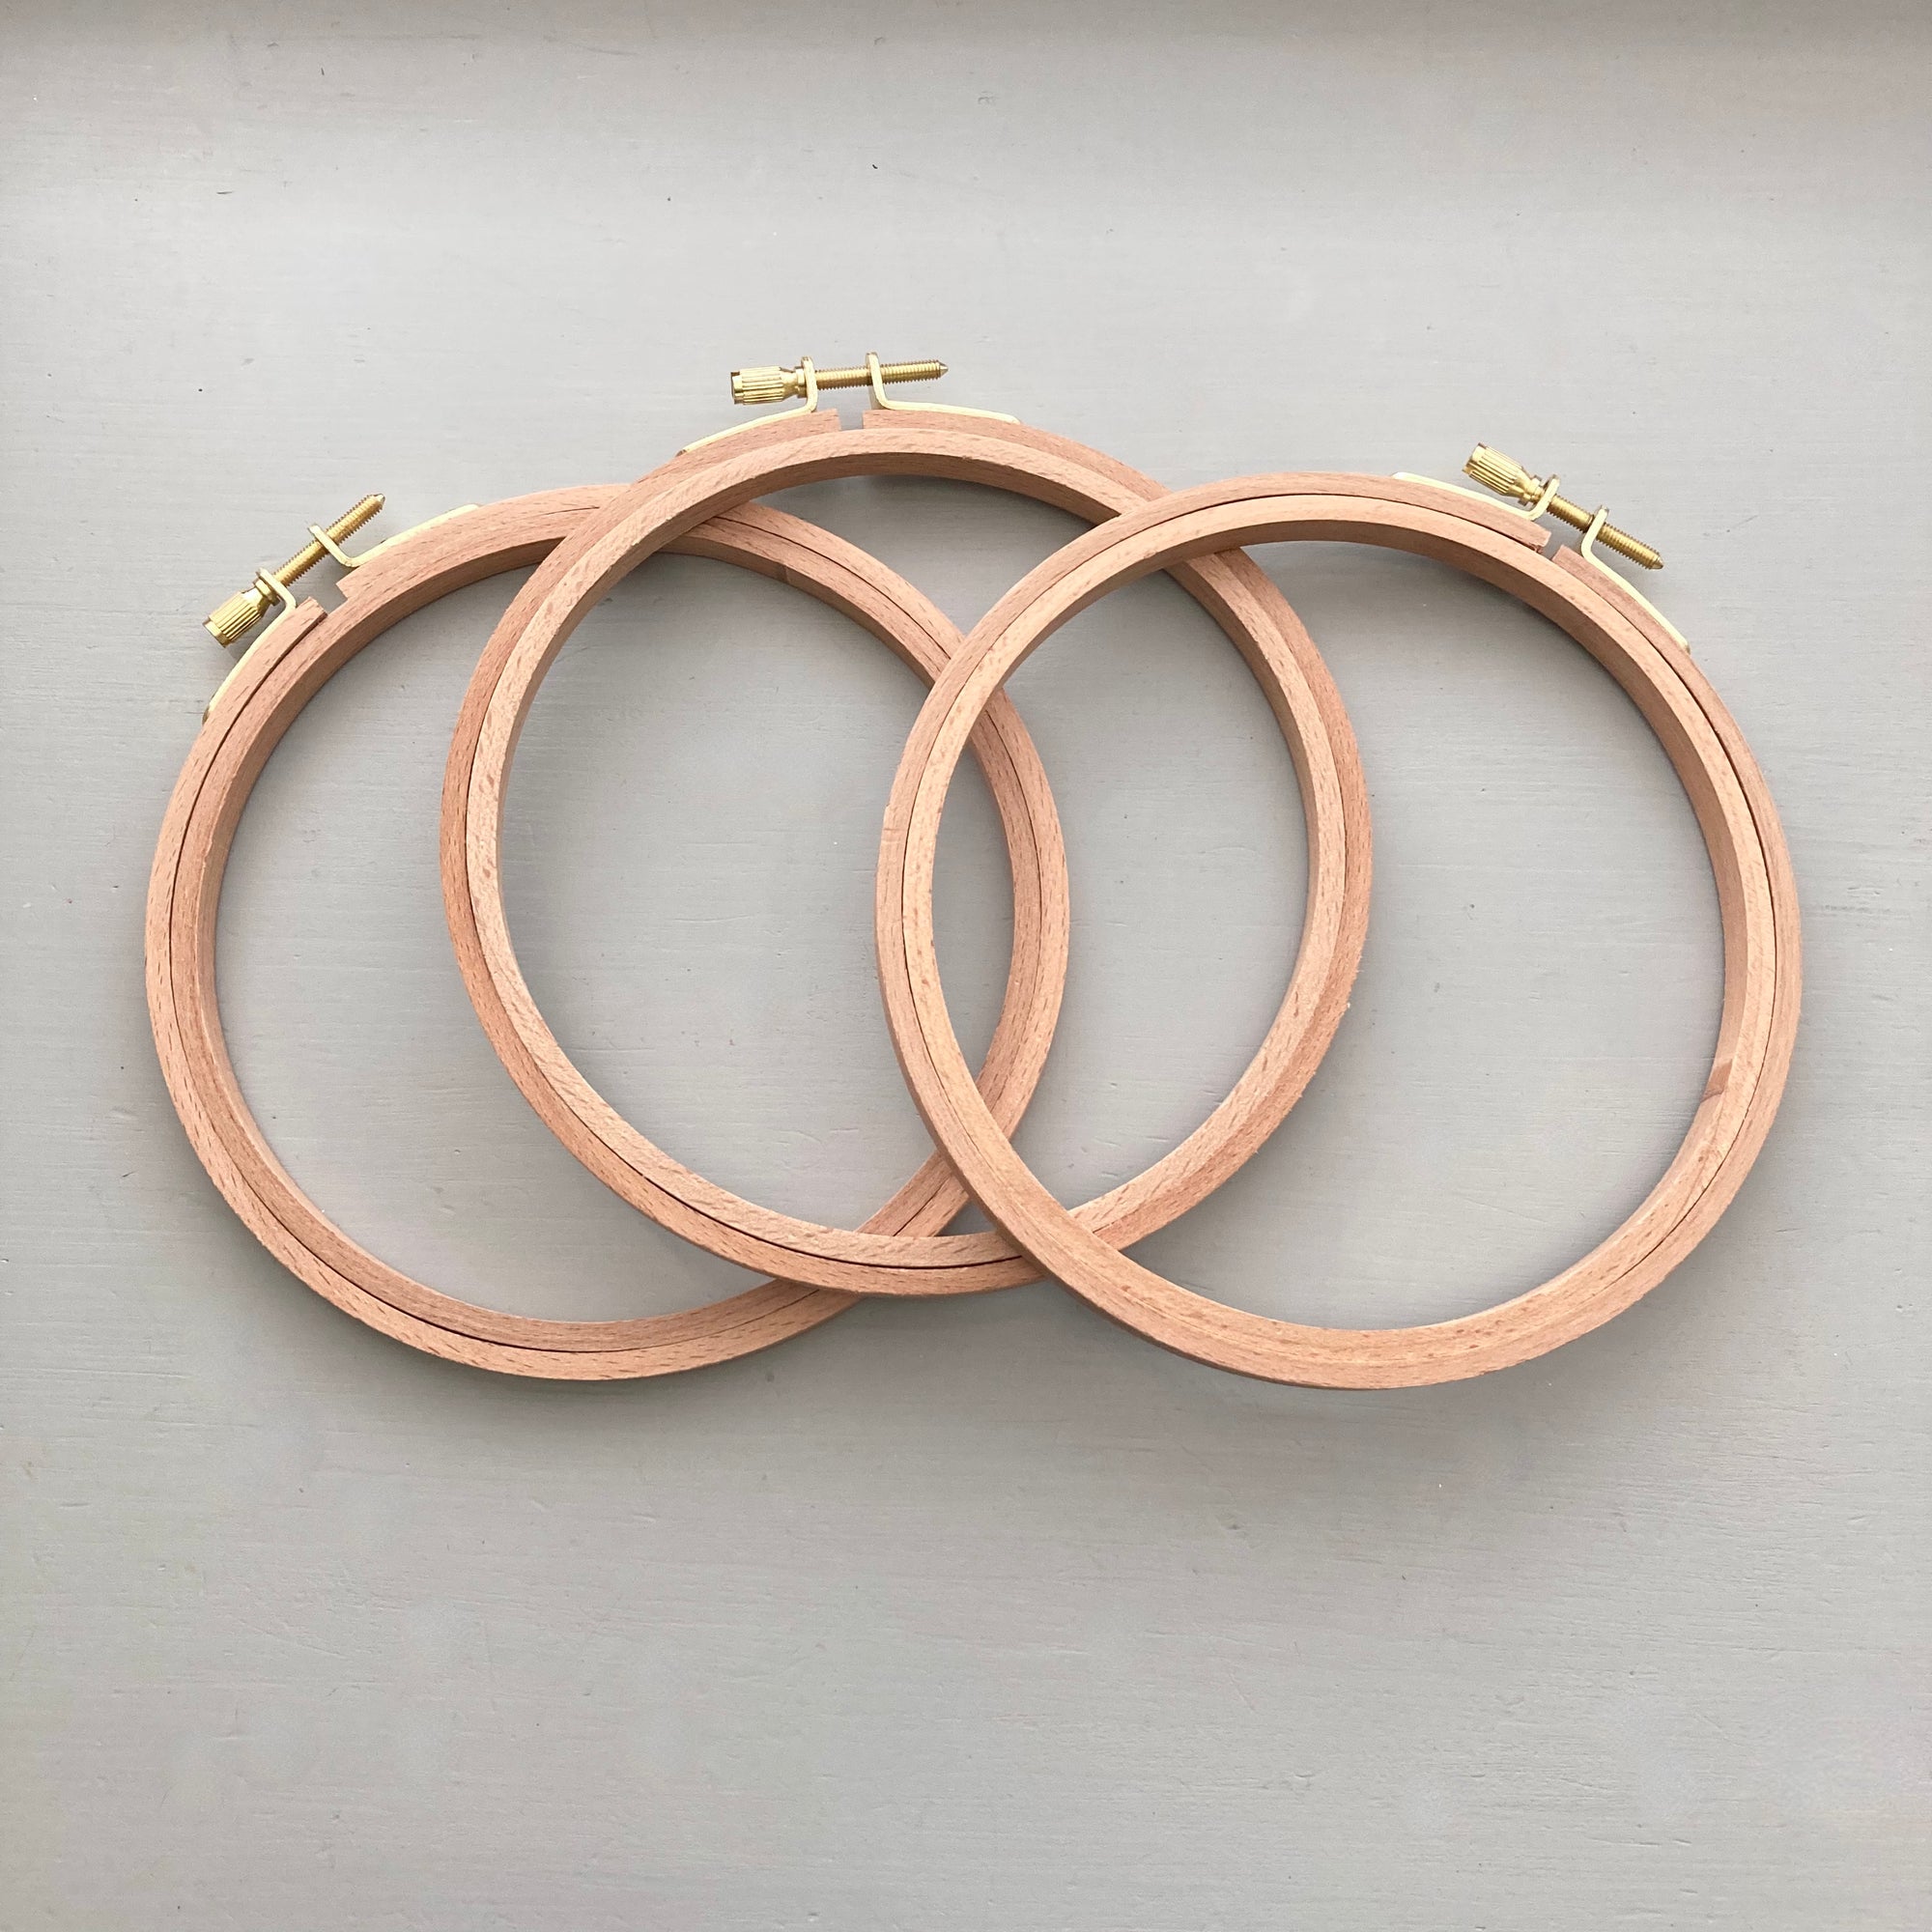 Wholesale Beech Wood Craft Hoops for Recreation and Hobby 